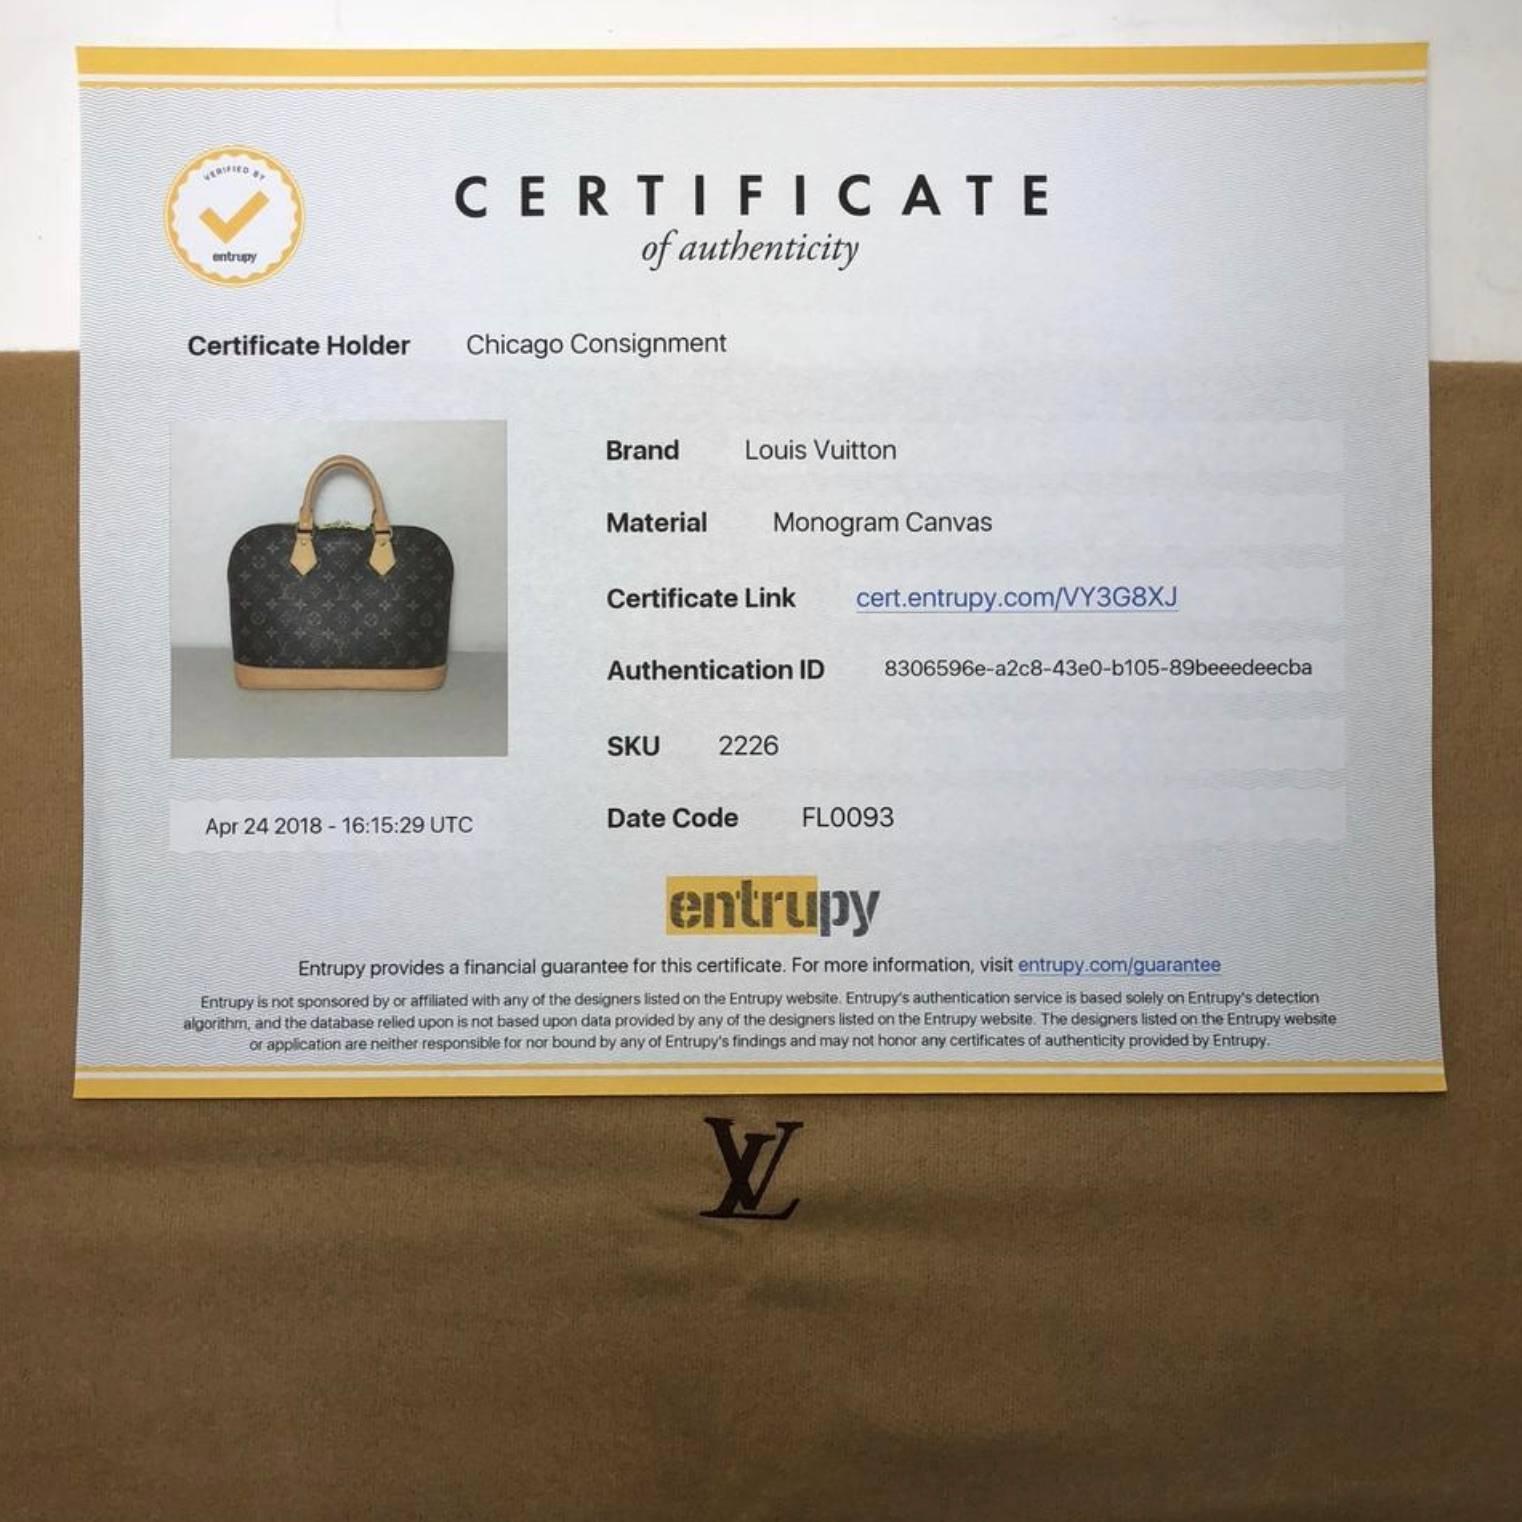 MODEL - Louis Vuitton Monogram Alma PM

CONDITION - Exceptional. Clean and light vachette, light watermarks on base and lower trim. No rips, holes, tears, stains or odors. Piece maintains original shape without cracks or creases. Bright and shiny